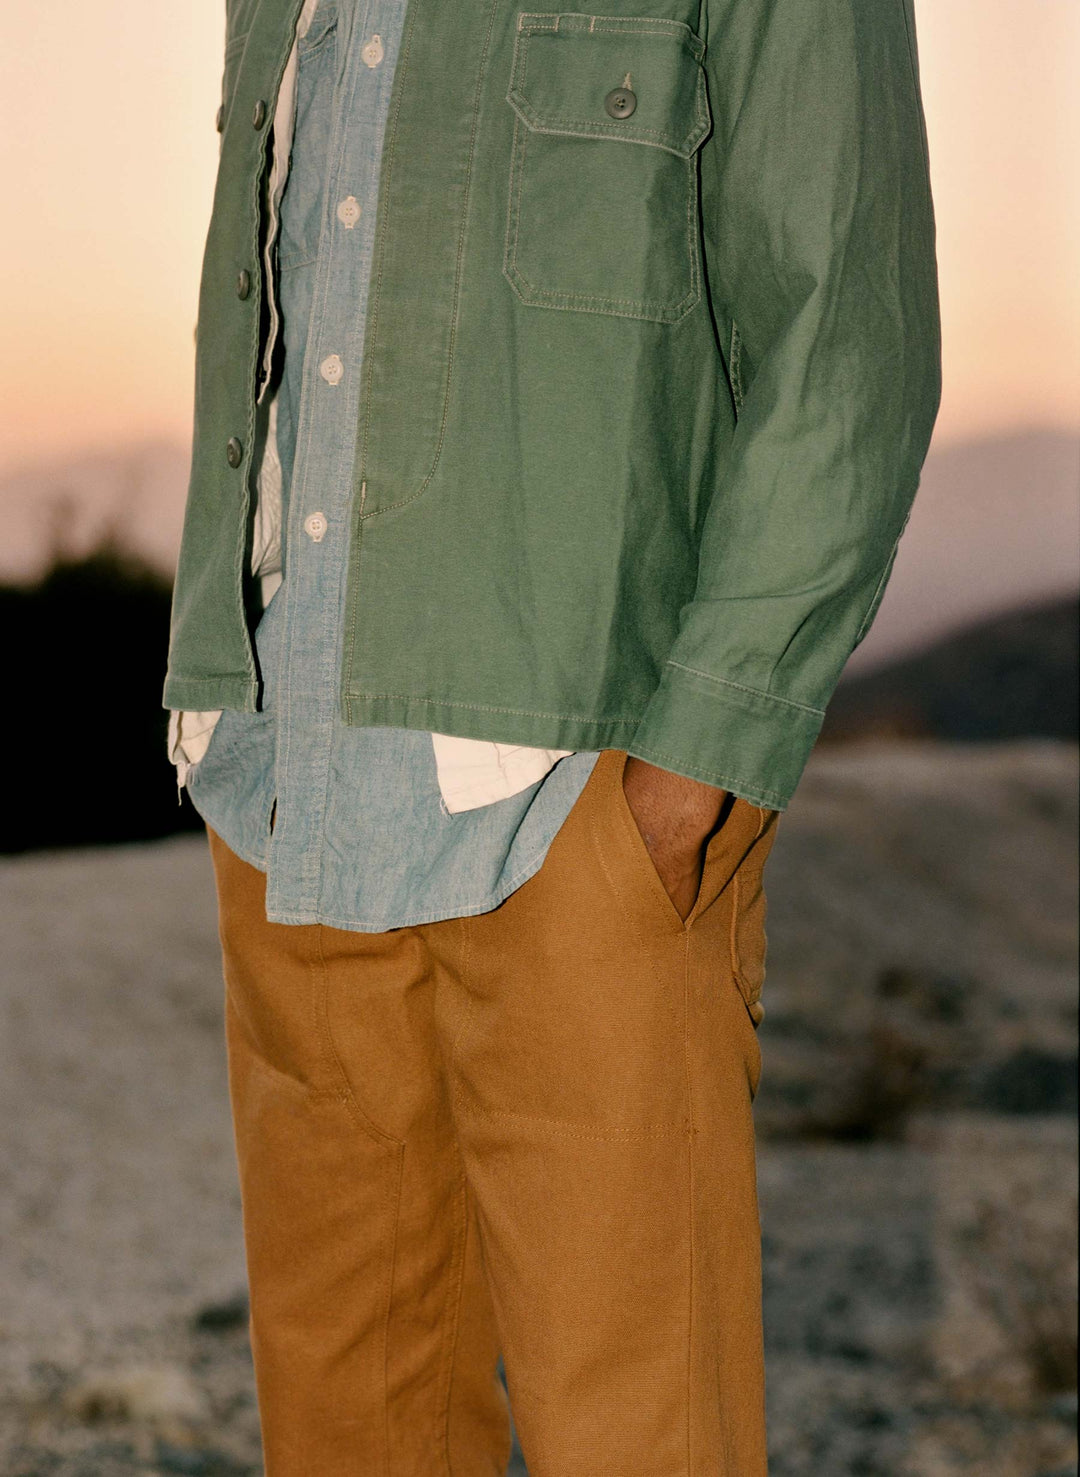 a man wearing a green jacket and brown pants